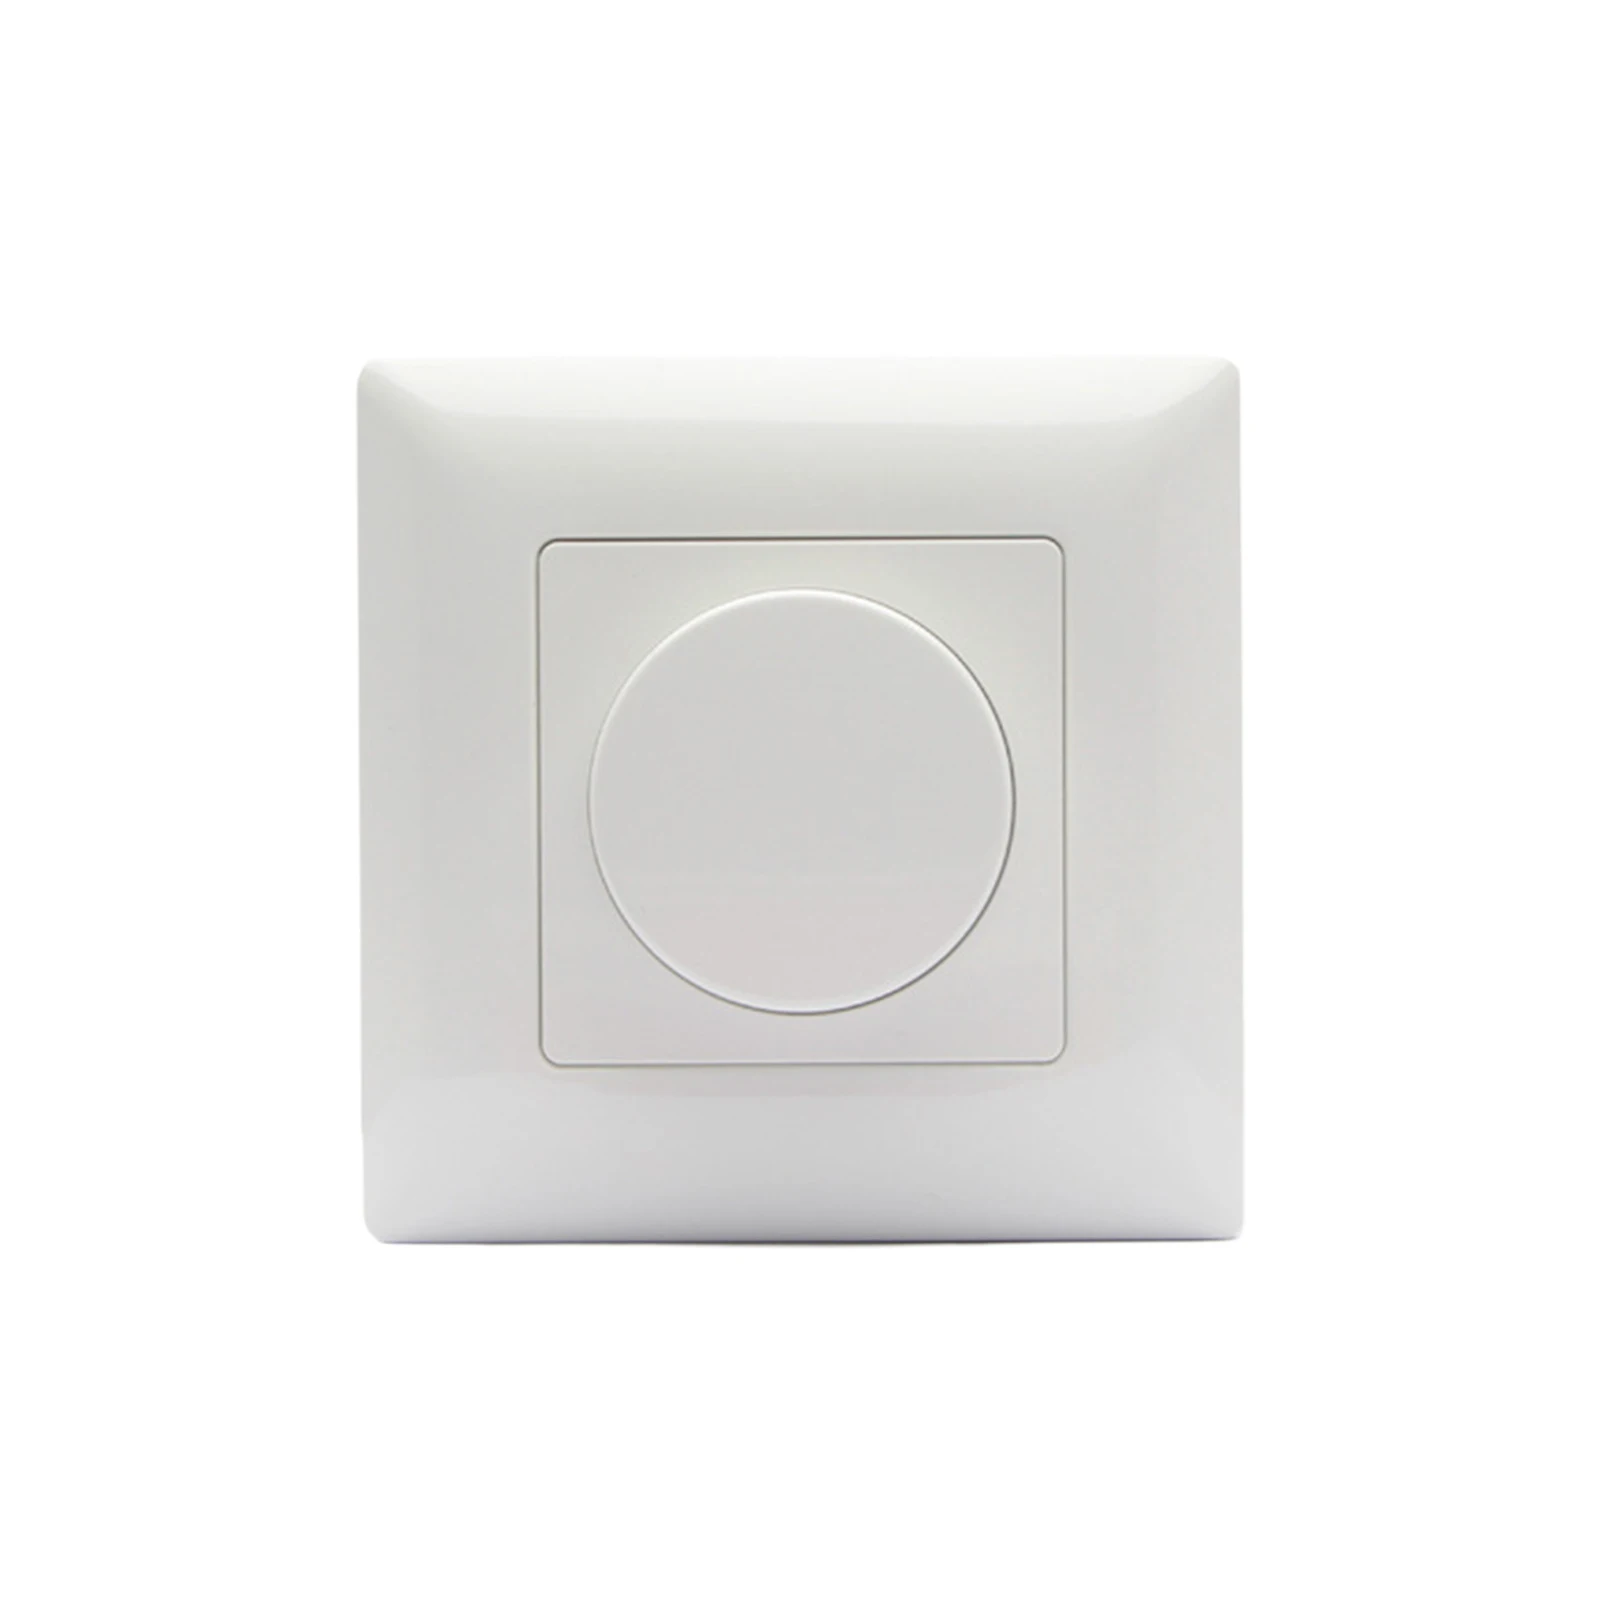 

Dimmer Switch For LED Light Smooth White Home Office Quiet Decorative Rotary Knob No Flicker 1 Gang Practical Replacement